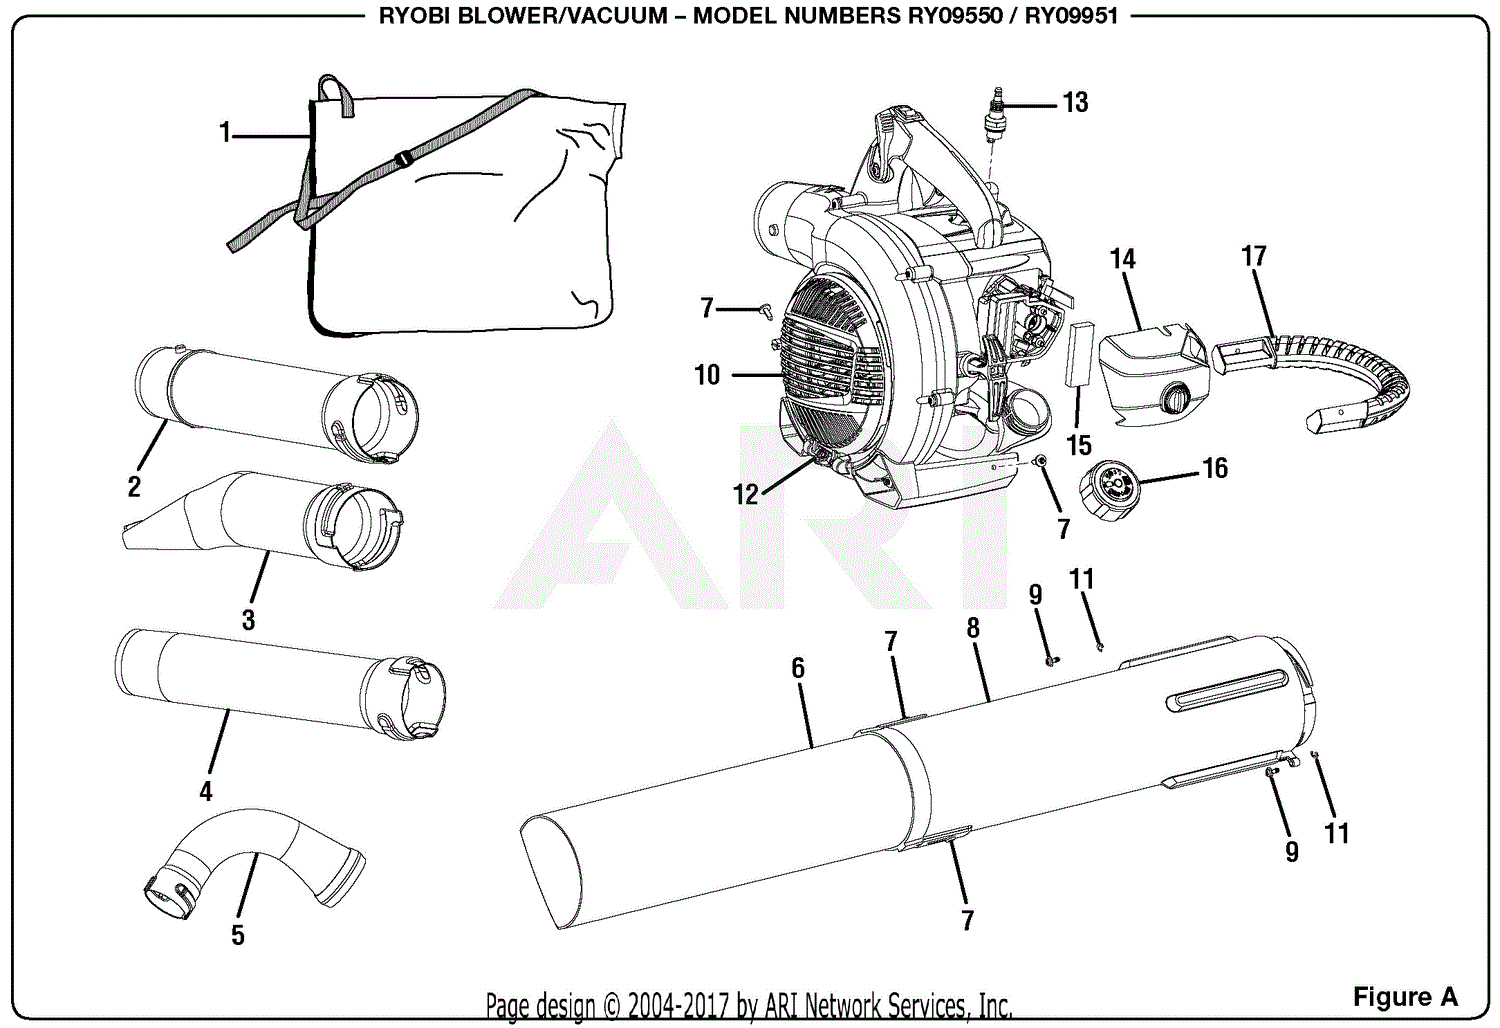 Homelite RY09550 Blower/Vacuum Parts Diagram for Figure A